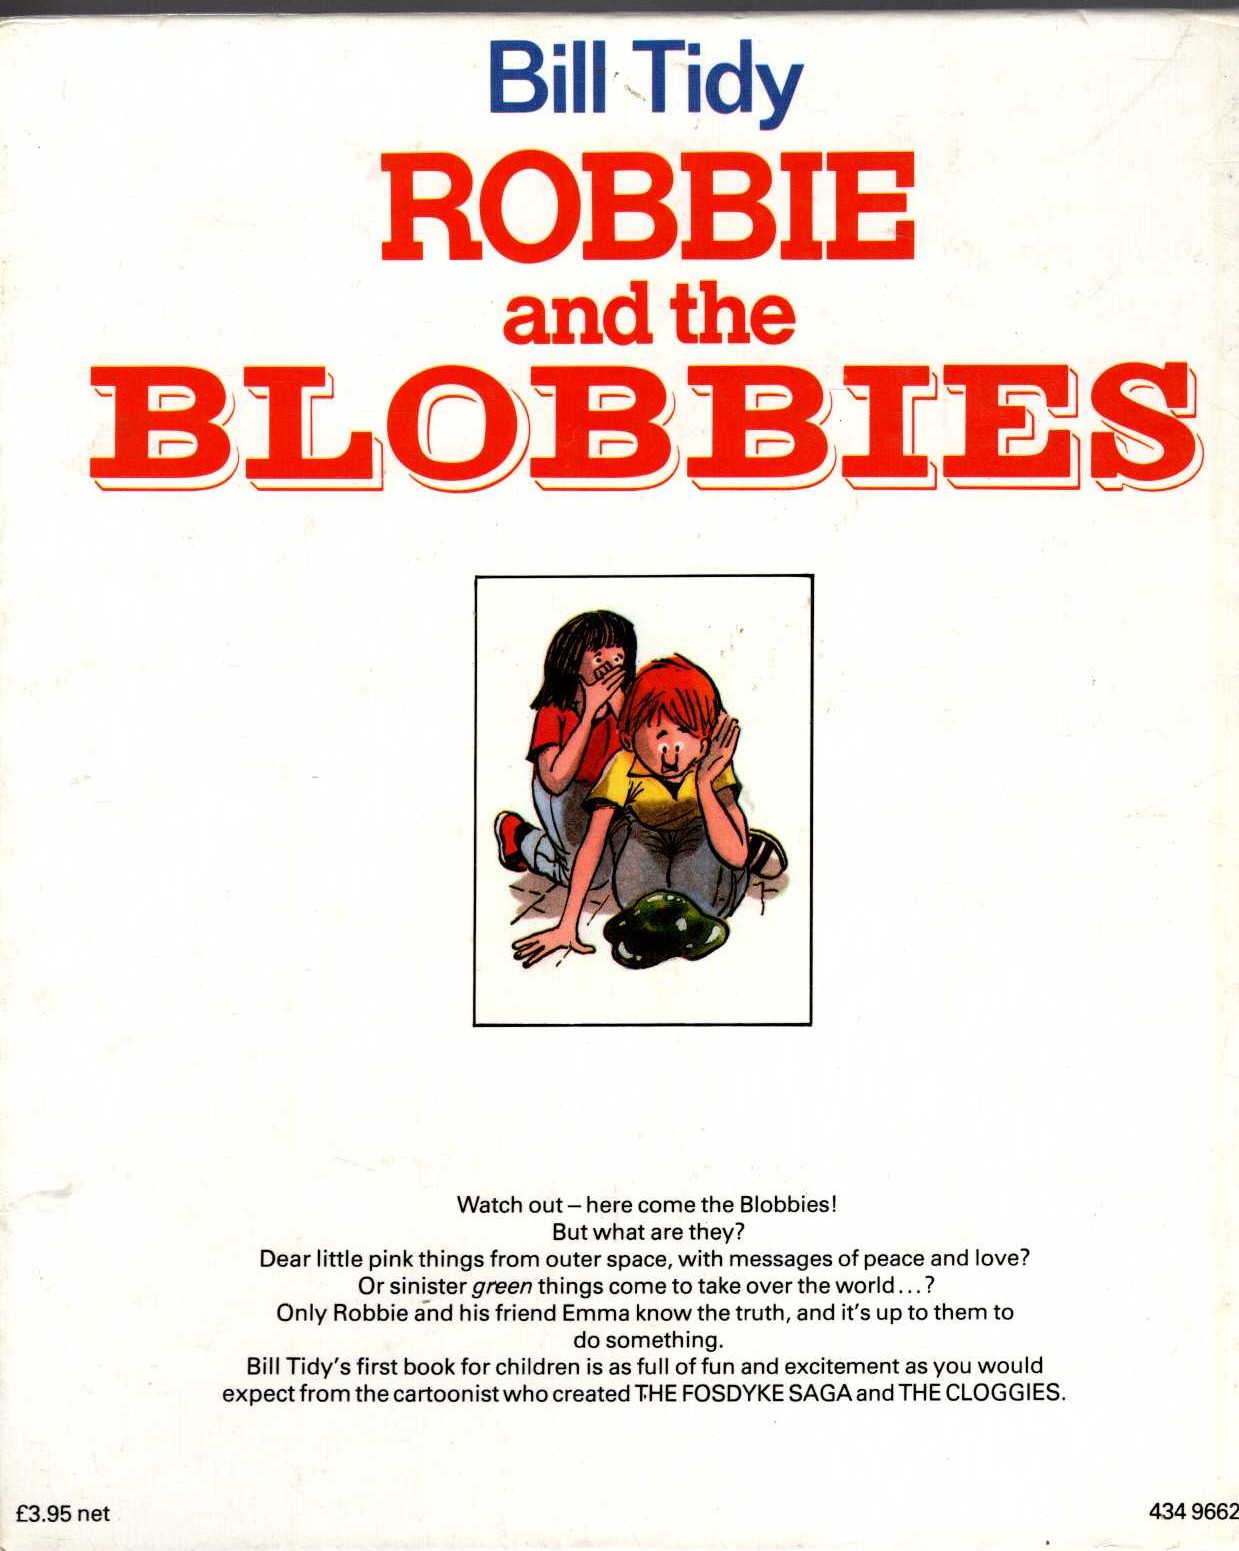 ROBBIE AND THE BLOBBIES. A Science Fiction Story for Children magnified rear book cover image